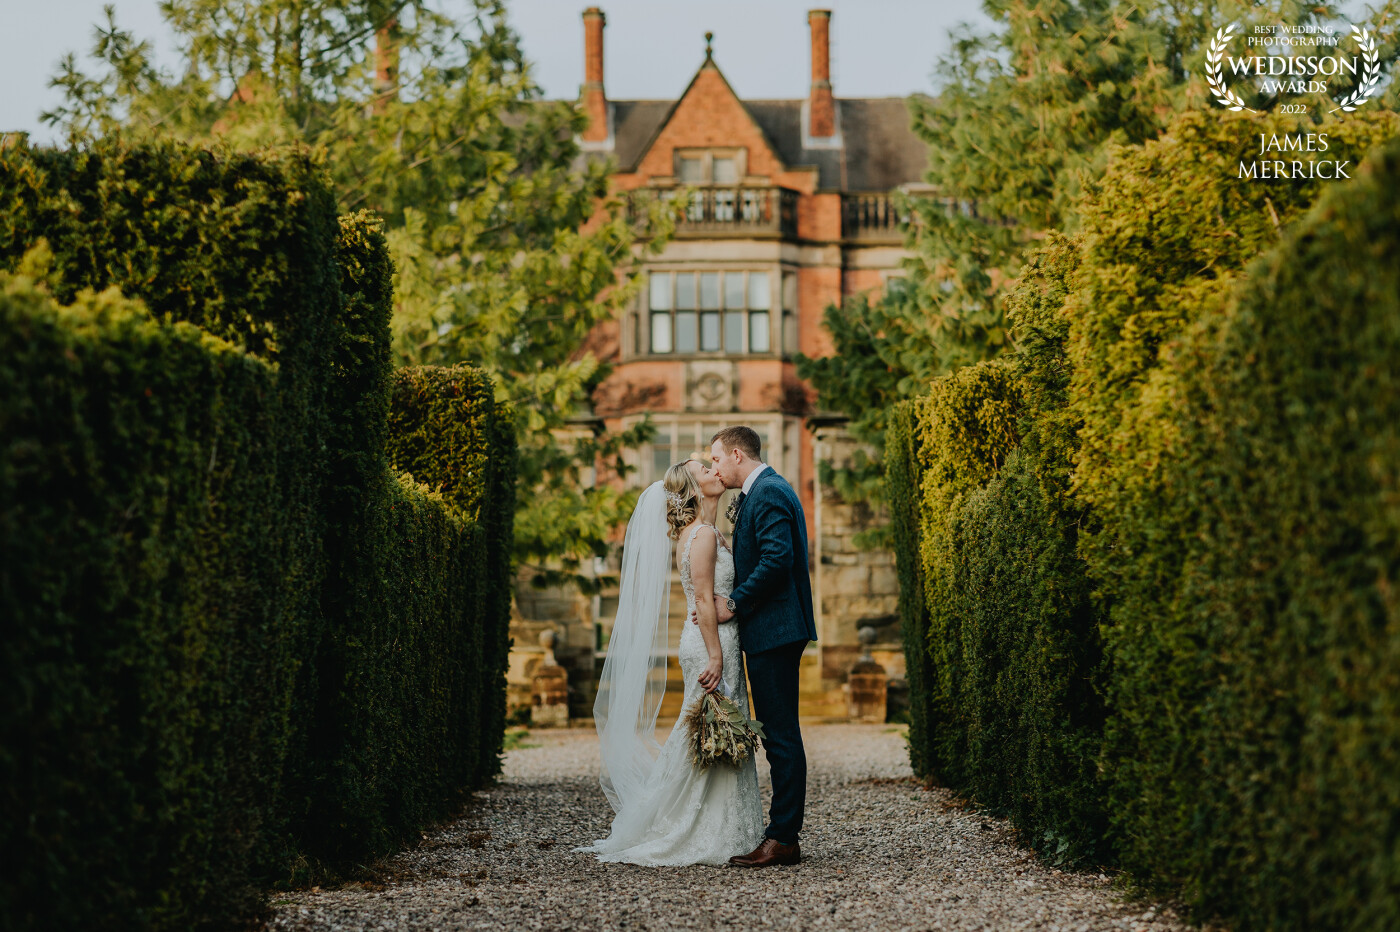 This frame was taken at a gorgeous golden hour at Hoar Cross Hall in Staffordshire, UK. I'm a huge fan or symmetrical imagery and the positioning of the house behind was too perfect to not capture.